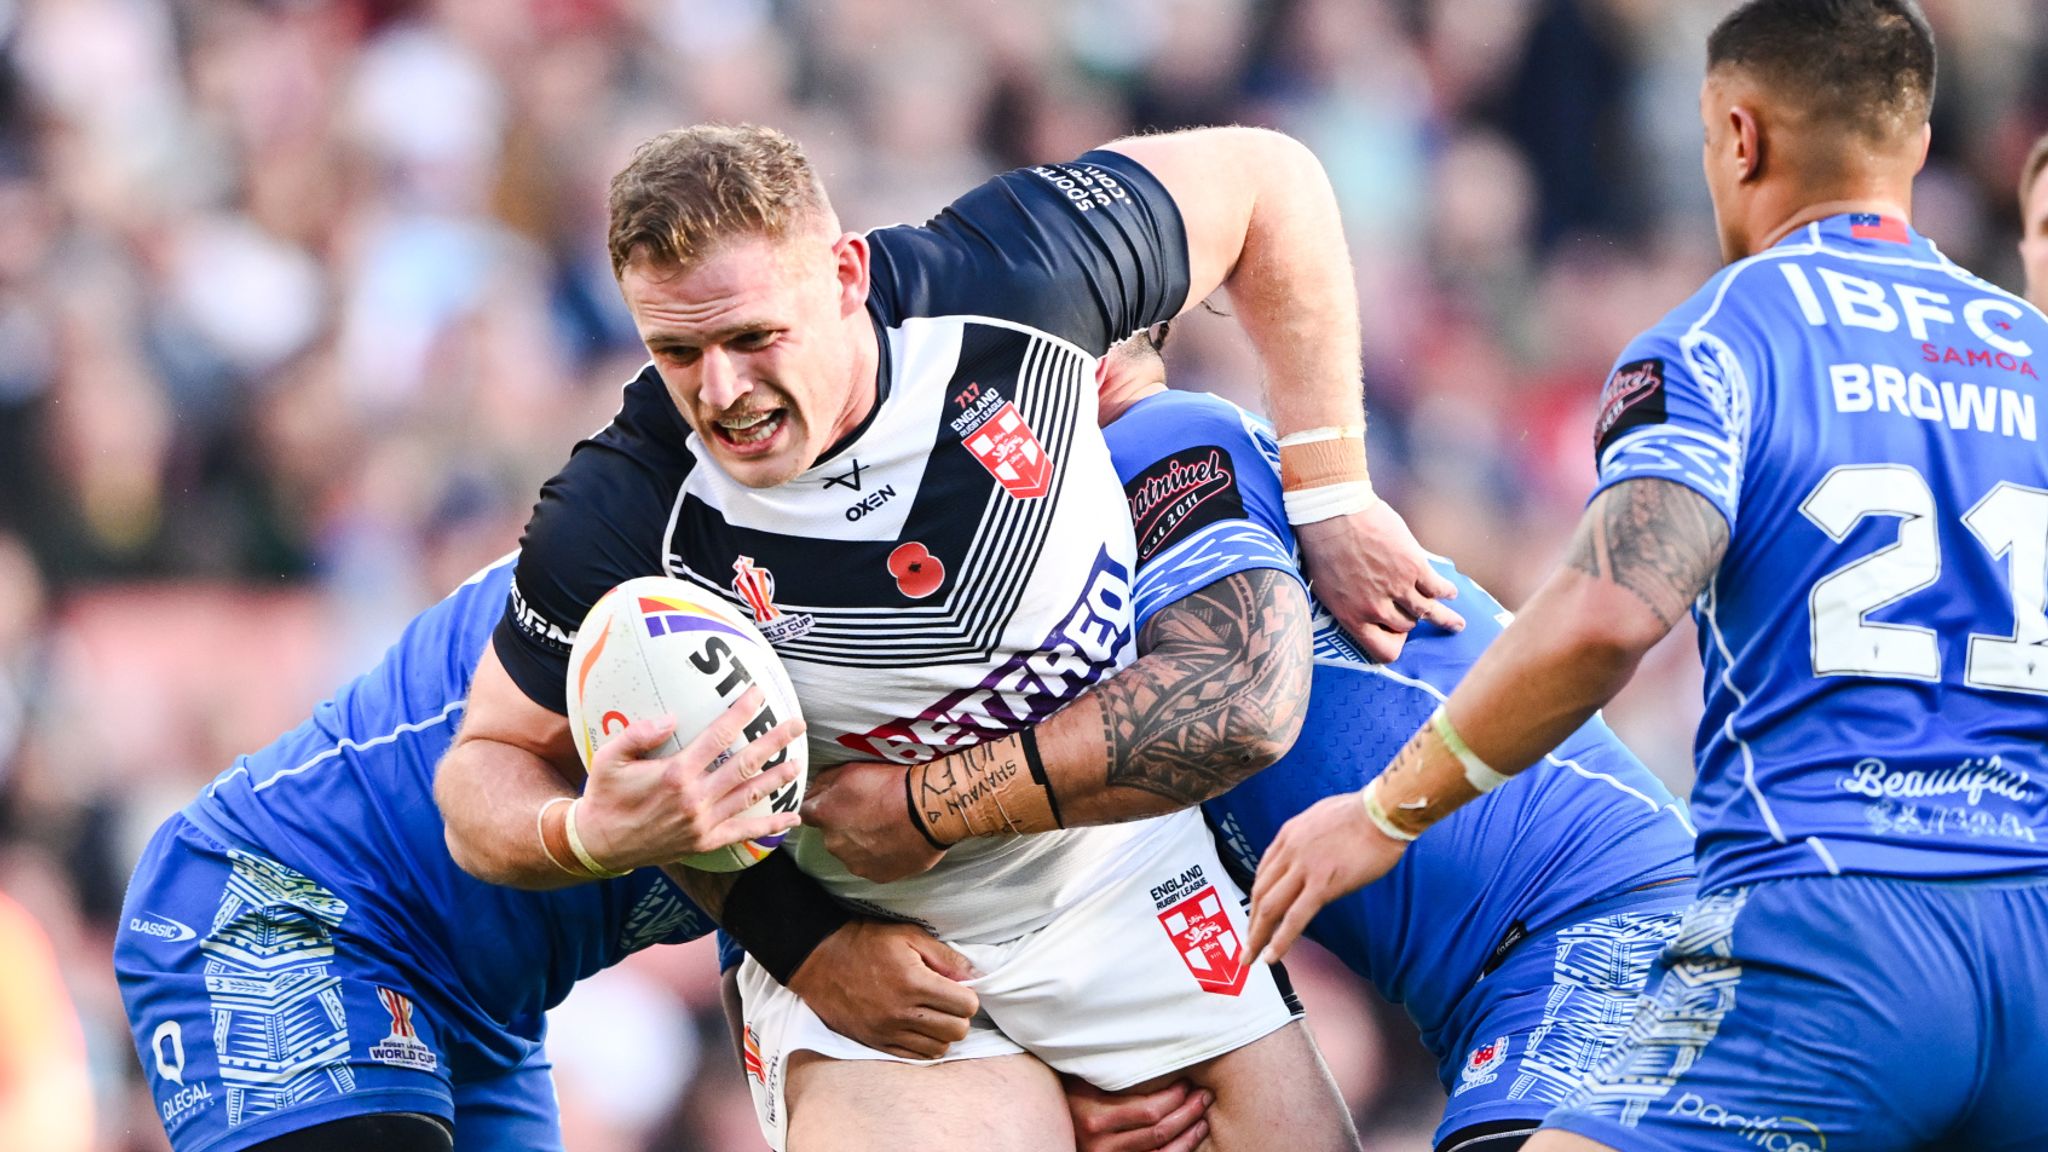 Rugby League World Cup England 26-27 Samoa semi-final at the Emirates Stadium recap Rugby League News Sky Sports